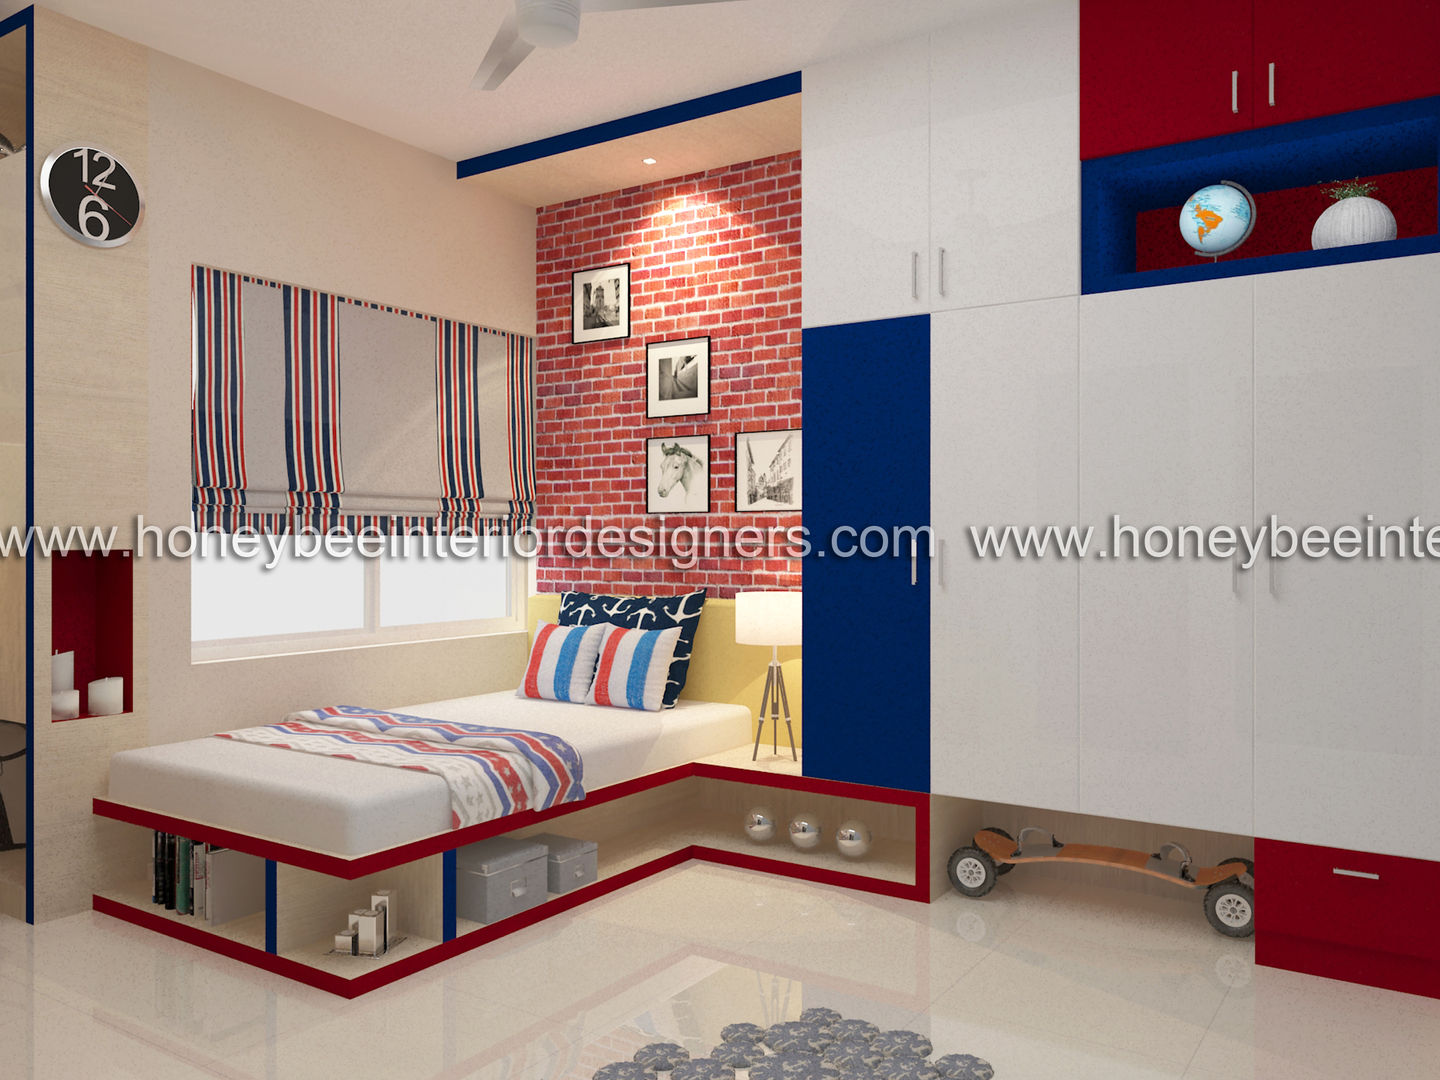 3 BHK Apartment for a young couple, Honeybee Interior Designers Honeybee Interior Designers Phòng ngủ phong cách chiết trung